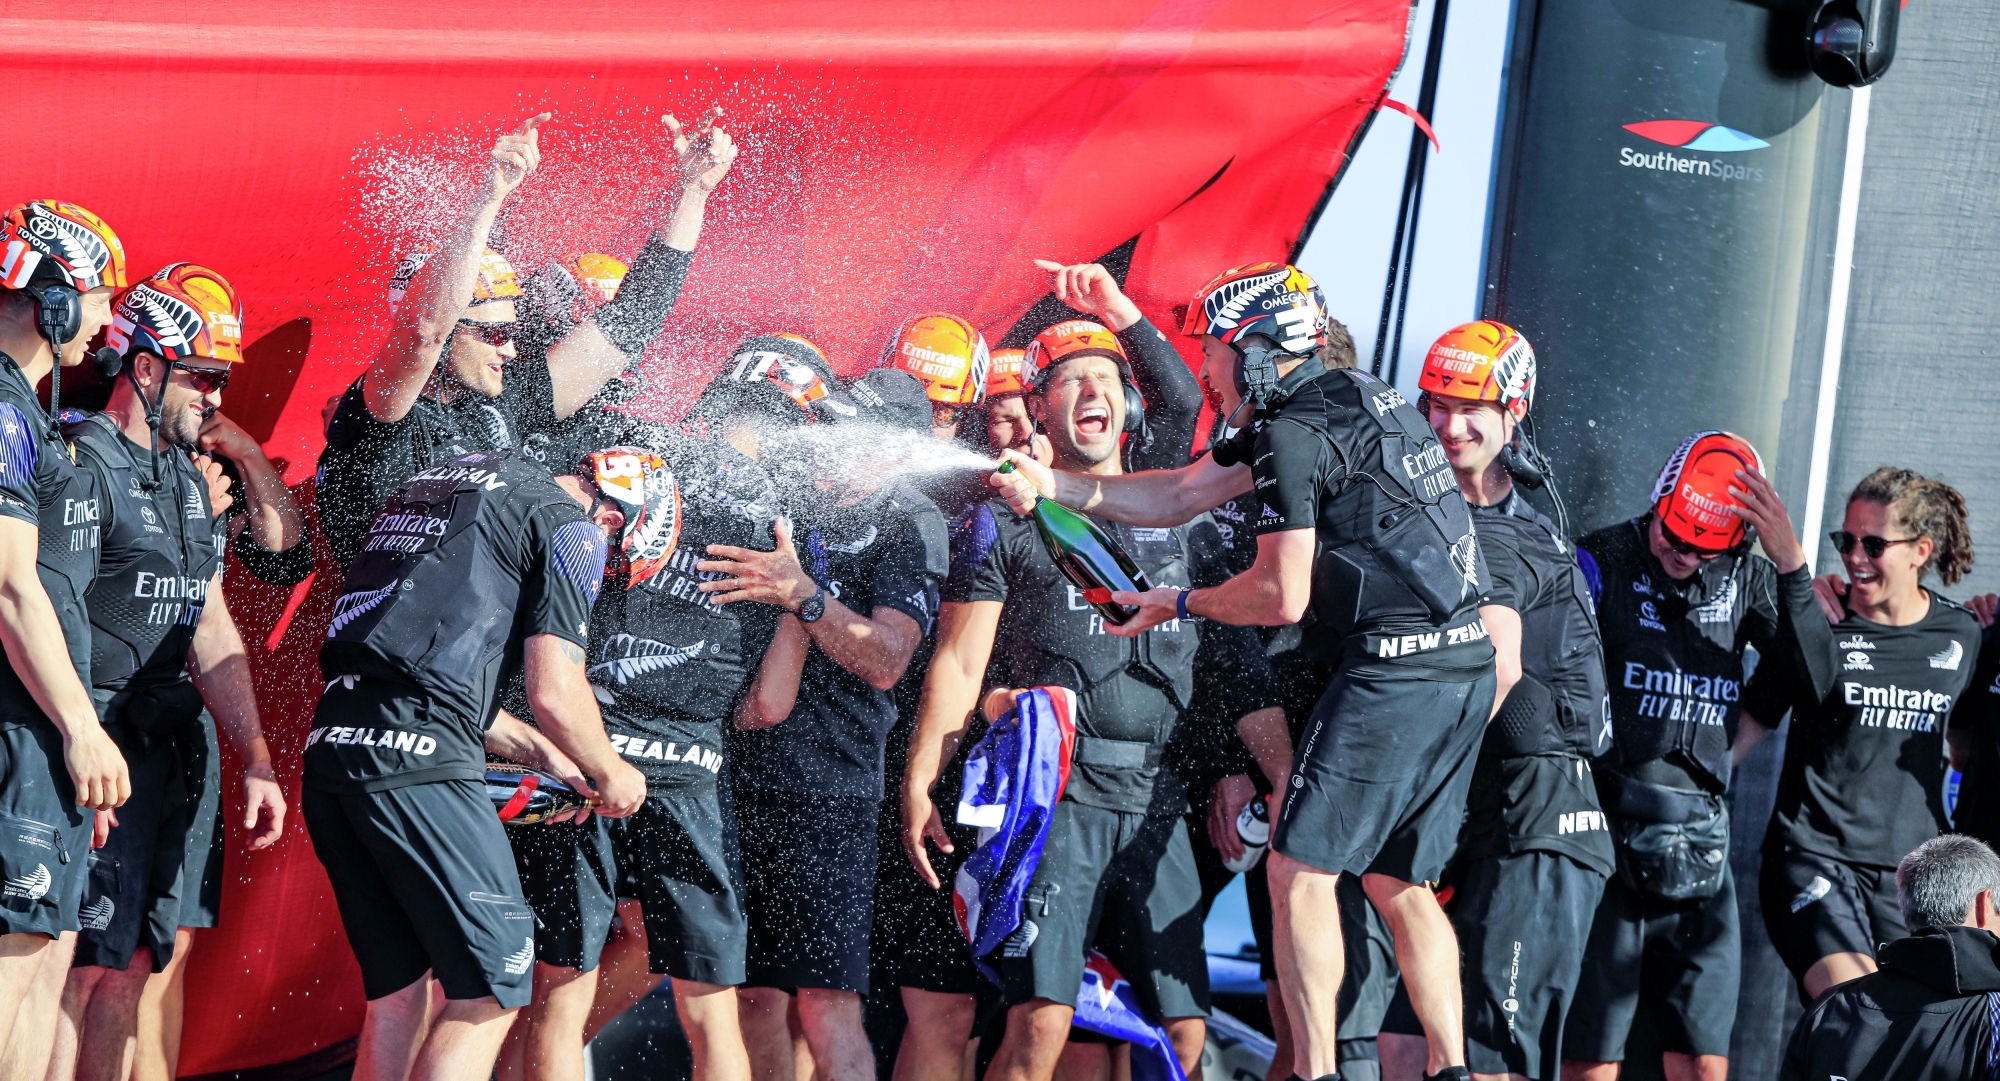  America's Cup  Auckland NZL  Final Day  Victoire pour Team New Zealand